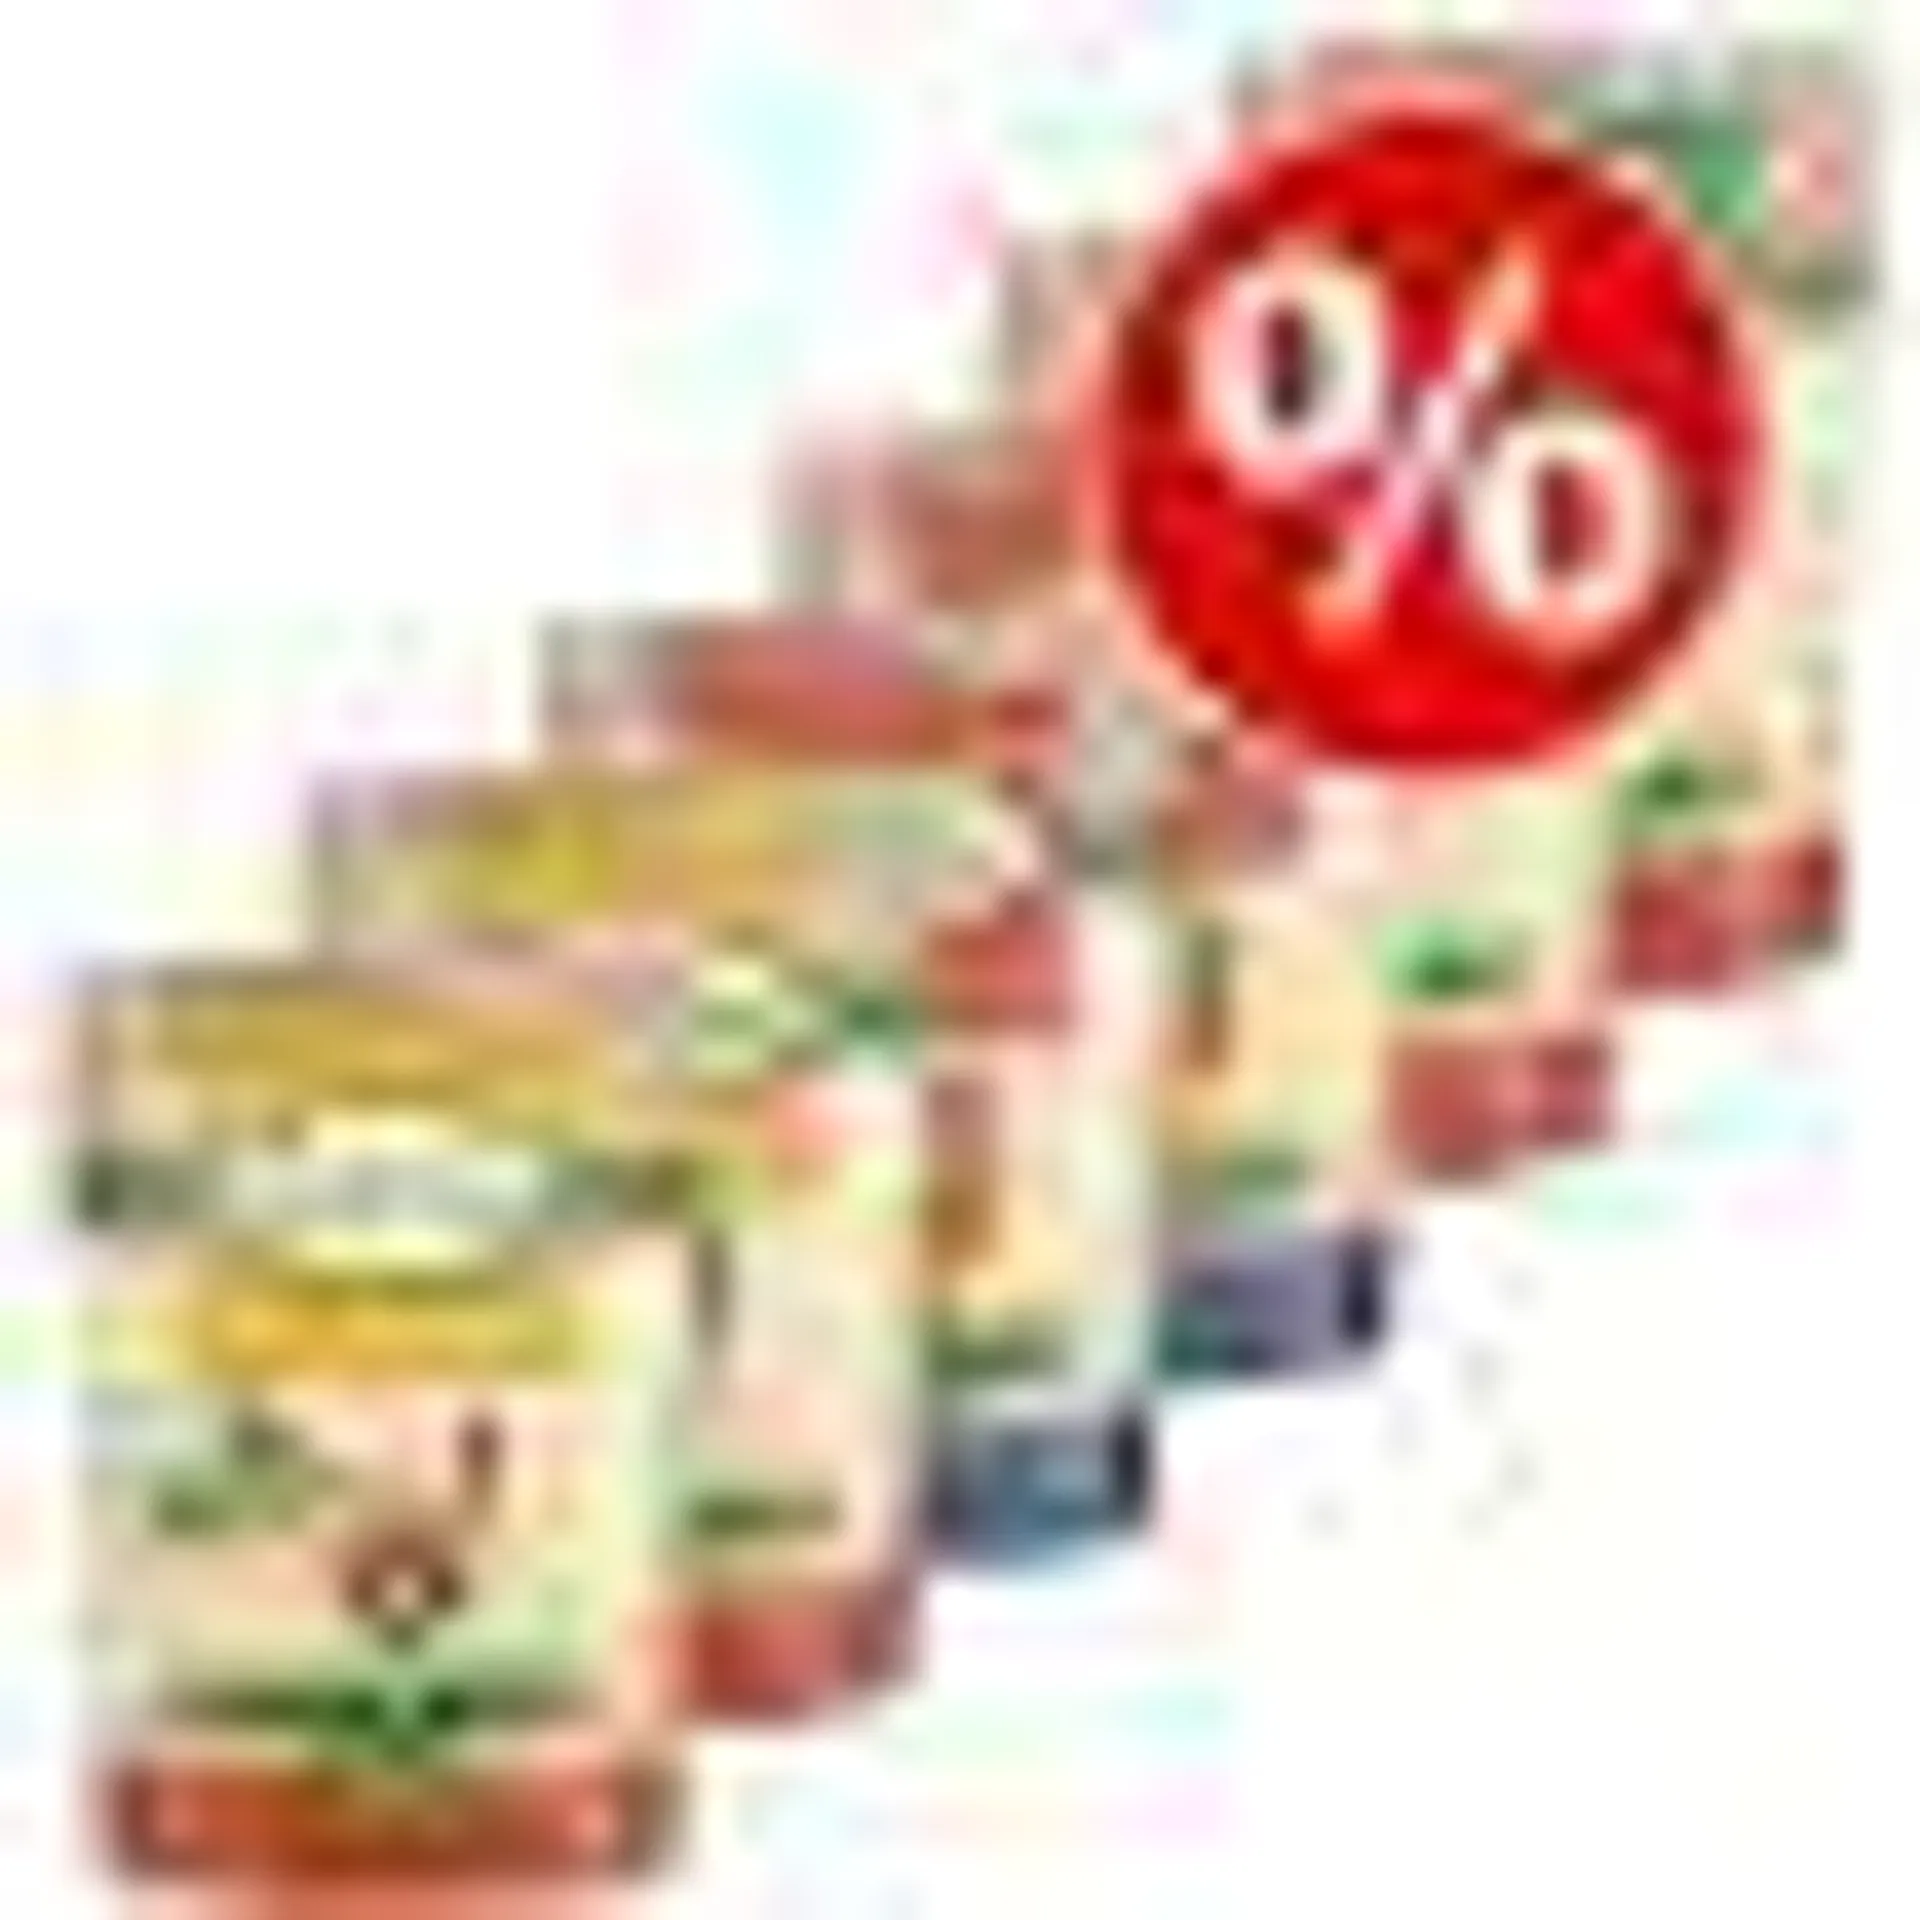 6 x 300g Lukullus Pouches Mixed Pack Wet Dog Food - Special Price!*